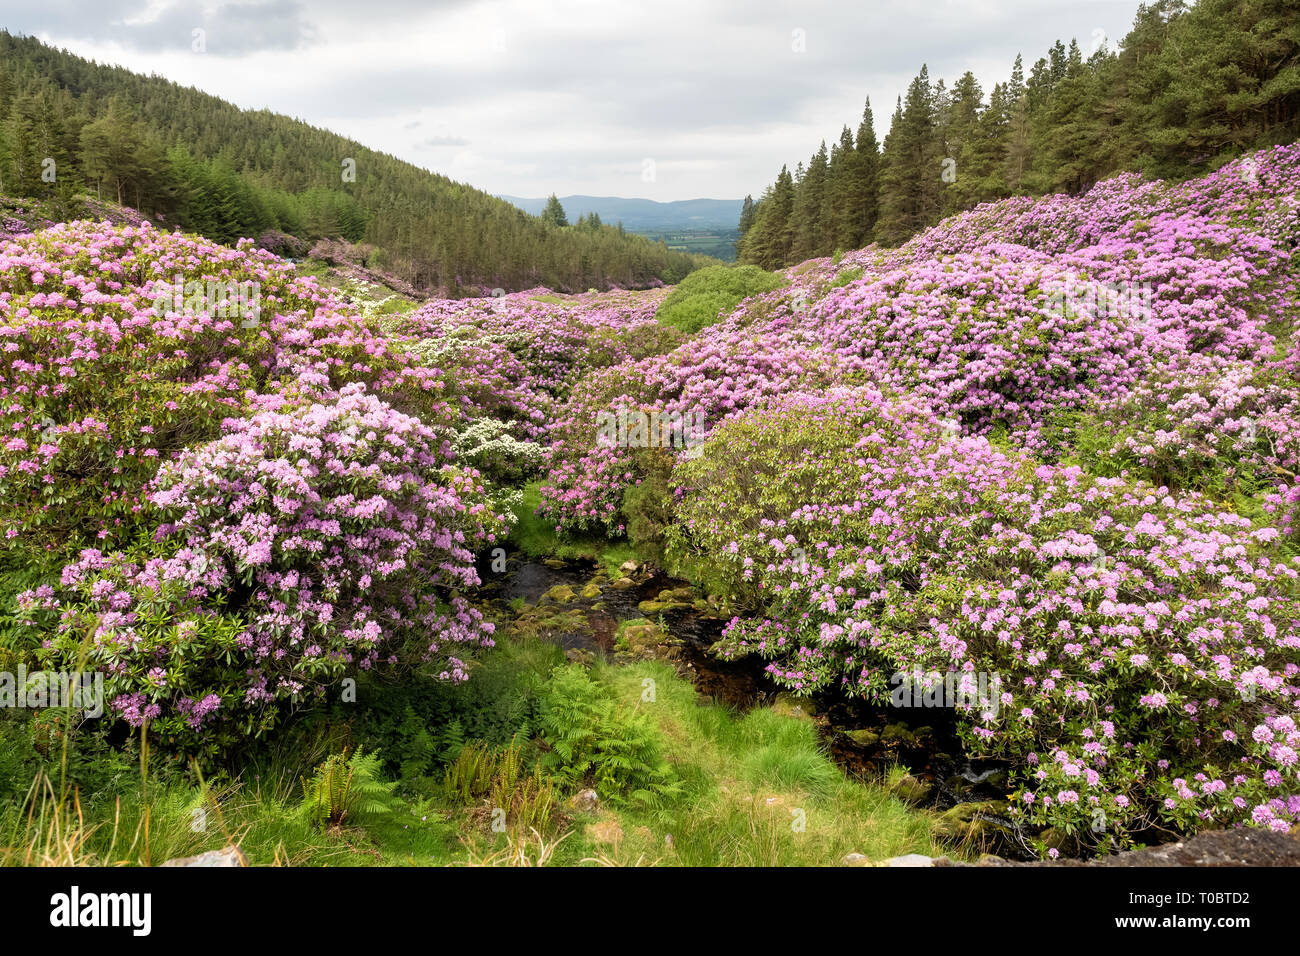 Rhododendron growing in the Vee valley in Ireland. Stock Photo